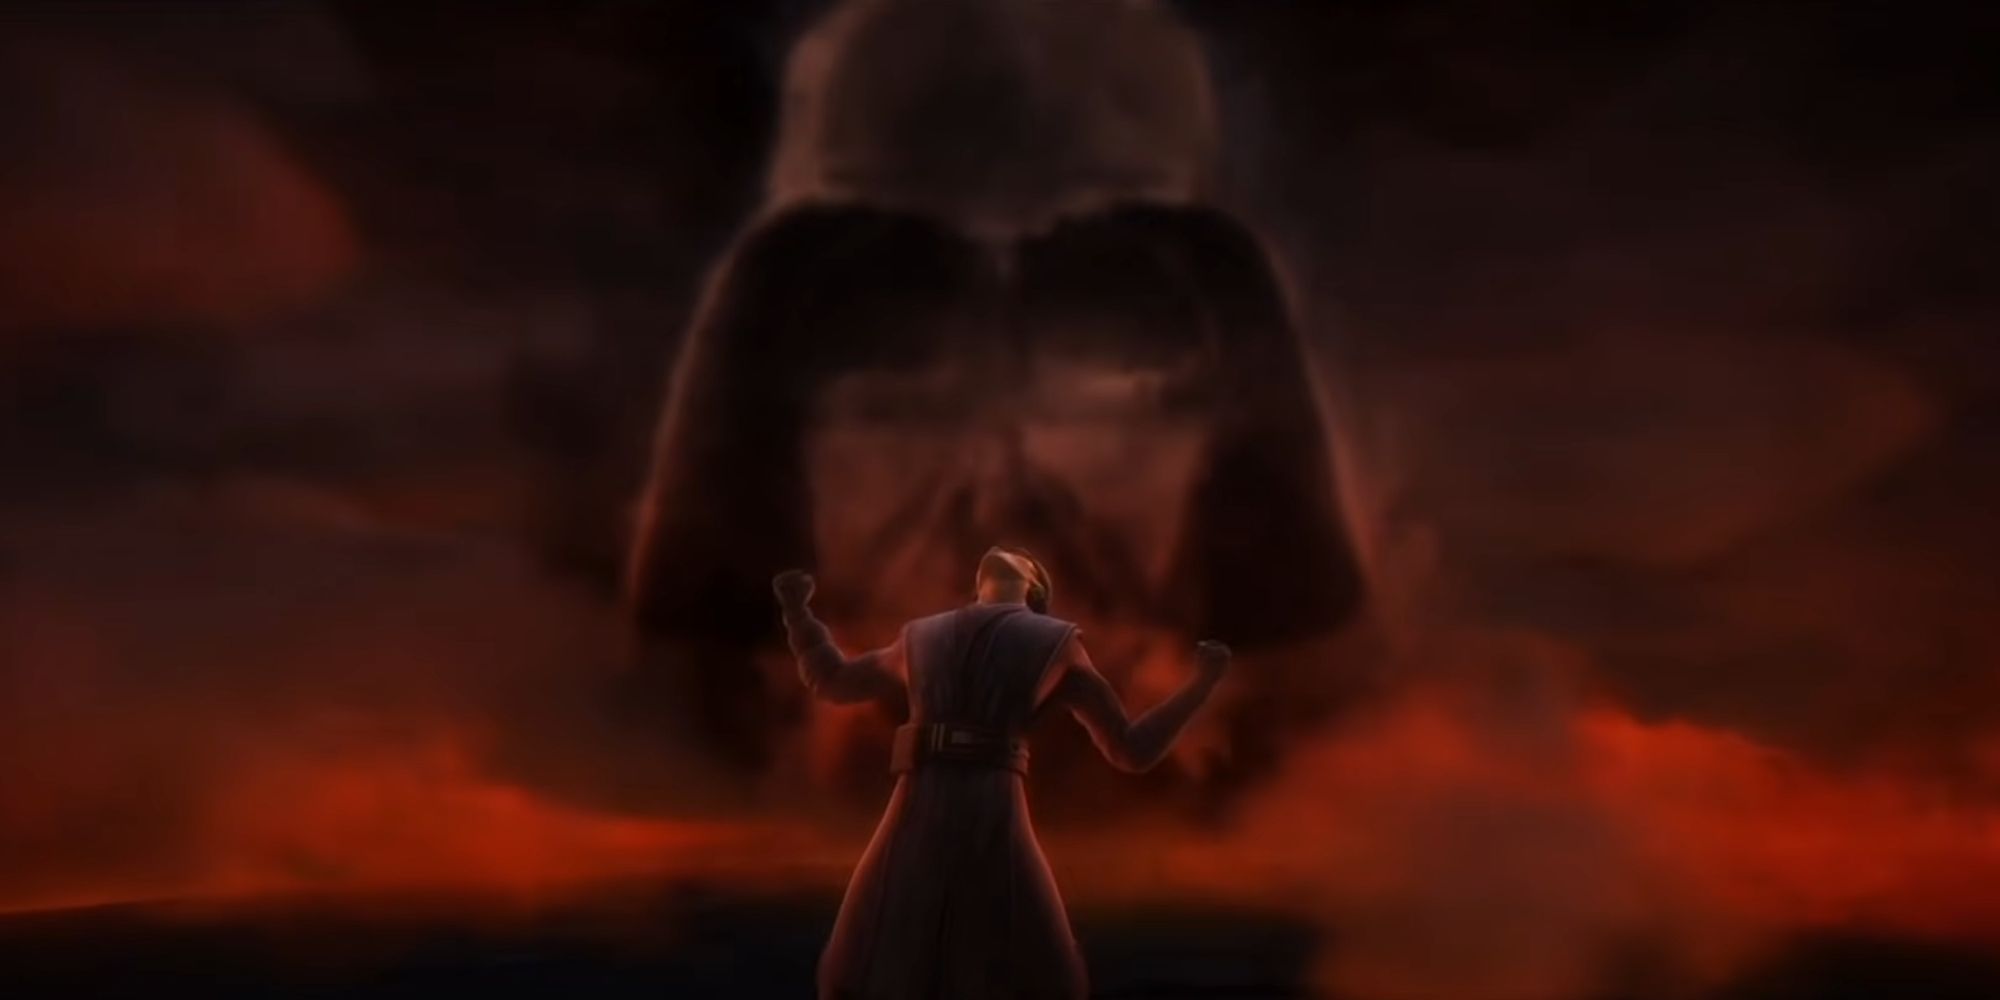 Anakin Skywalker experiencing a vision of the future in Star Wars The Clone Wars